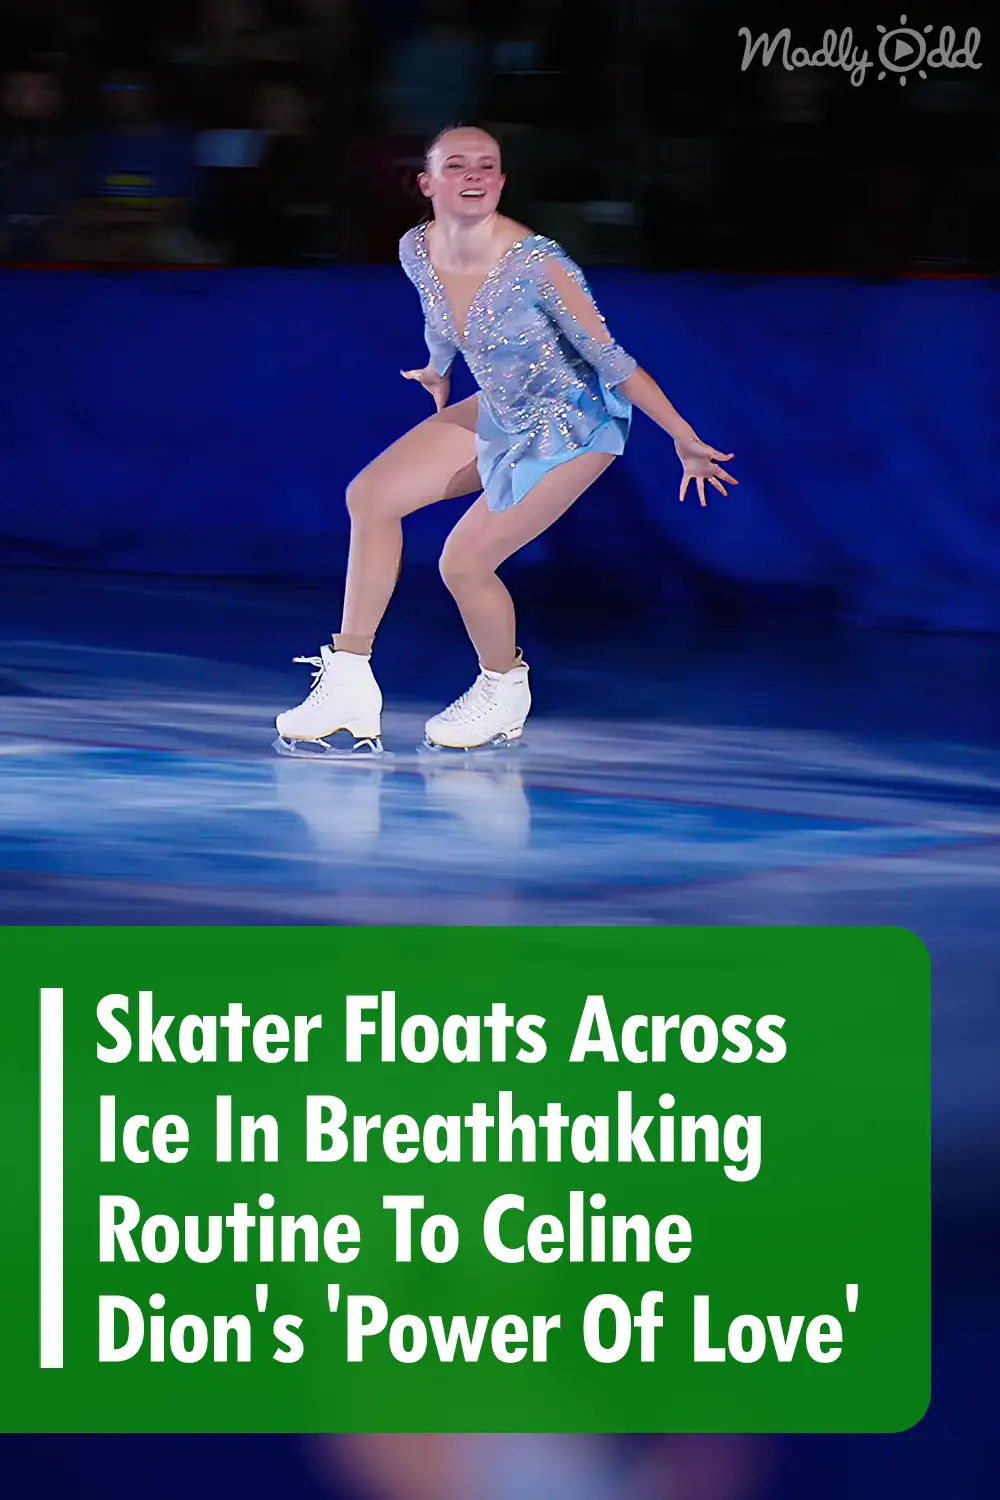 Skater Floats Across Ice In Breathtaking Routine To Celine Dion\'s \'Power Of Love\'